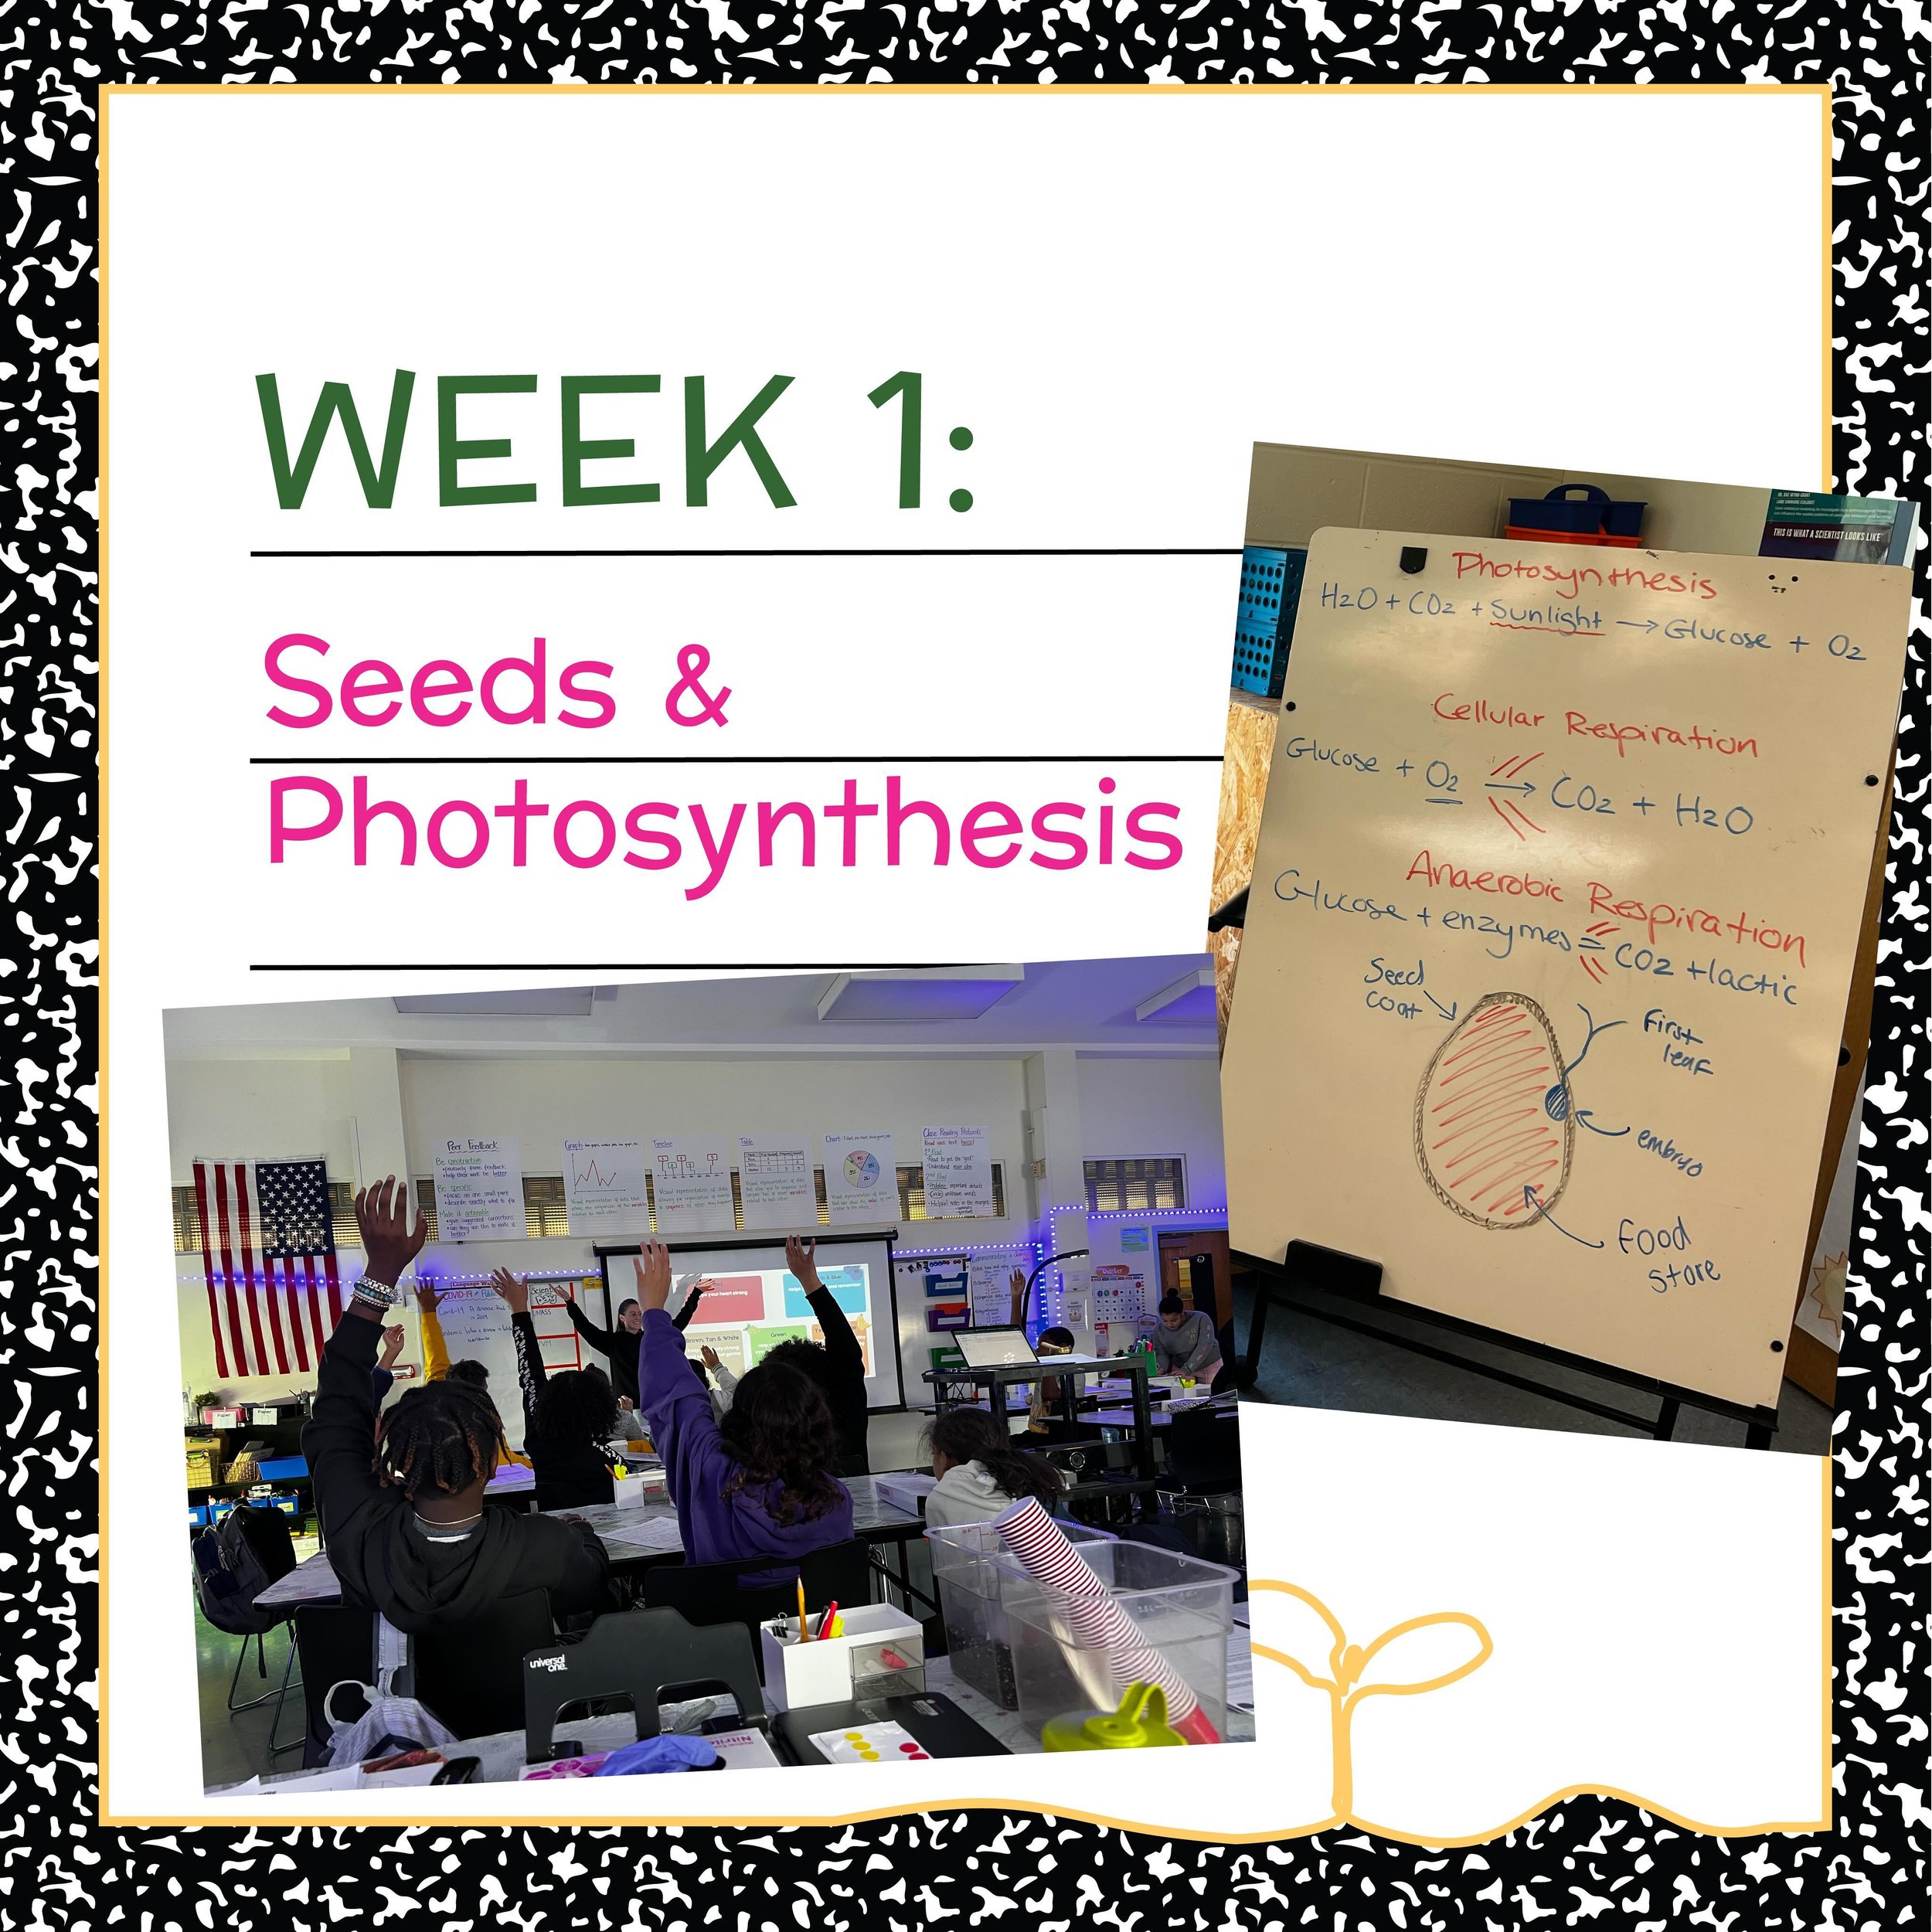 Week 1: Seeds and Photosynthesis. The beginning of our plant journey. On our first day in the classroom we start the lesson by getting our hands right in the dirt and planting our first microgreens. Then we take students through an interactive lesson